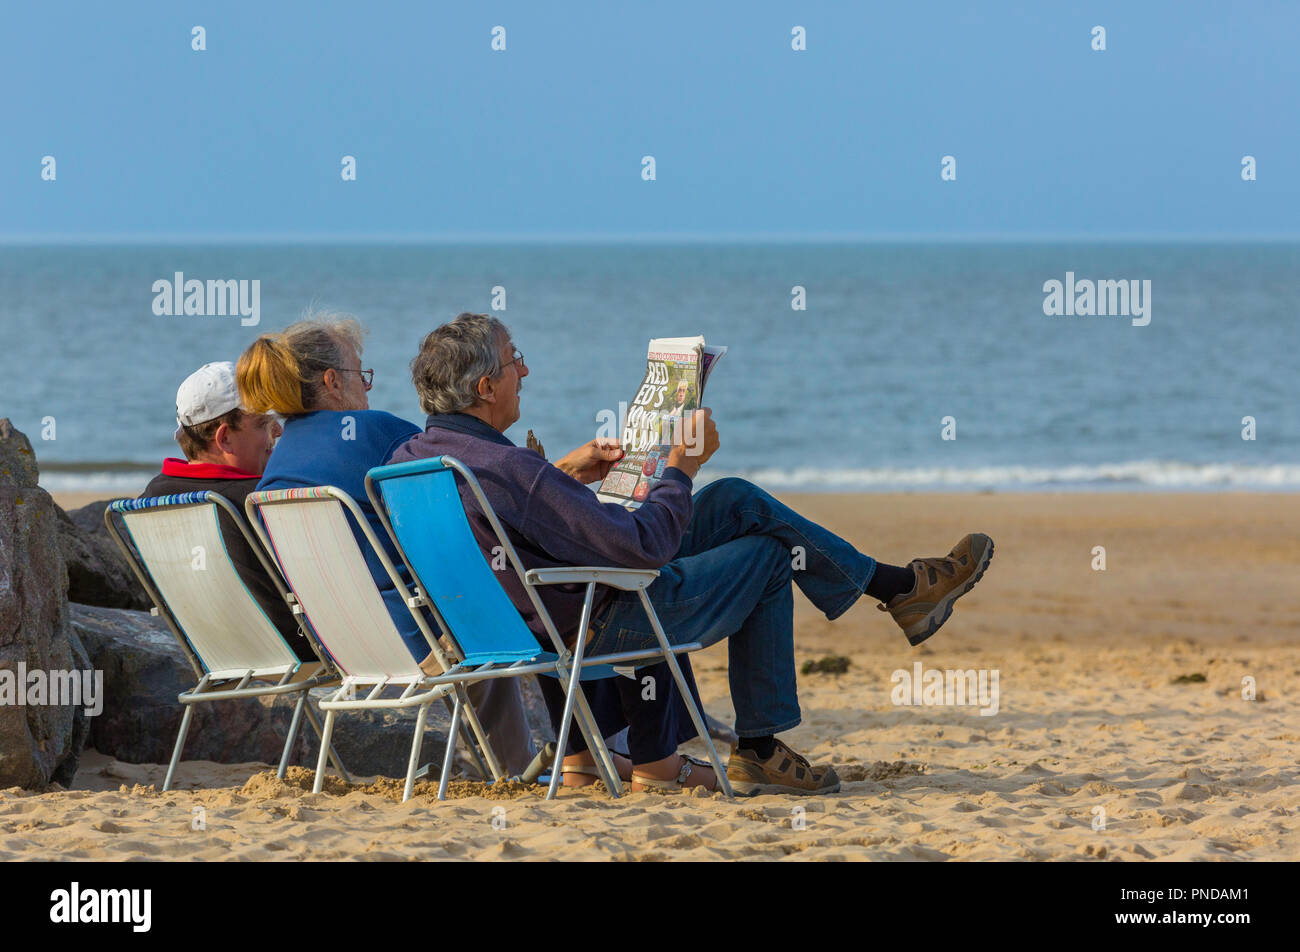 Relaxing on the beach at the end of summer. Stock Photo